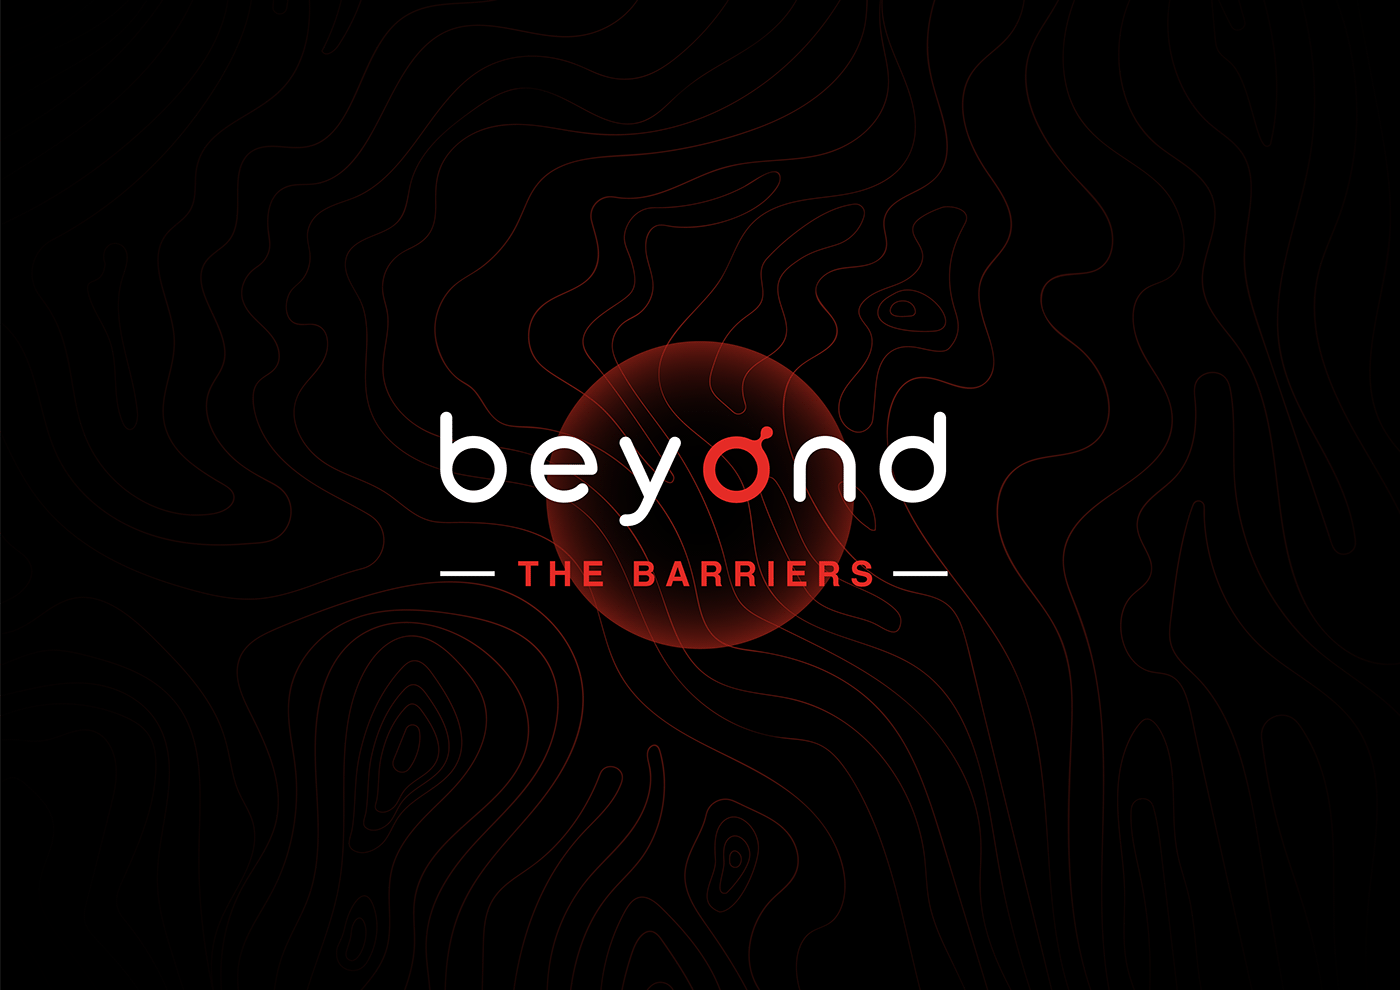 This Year's Theme: Beyond the Barriers